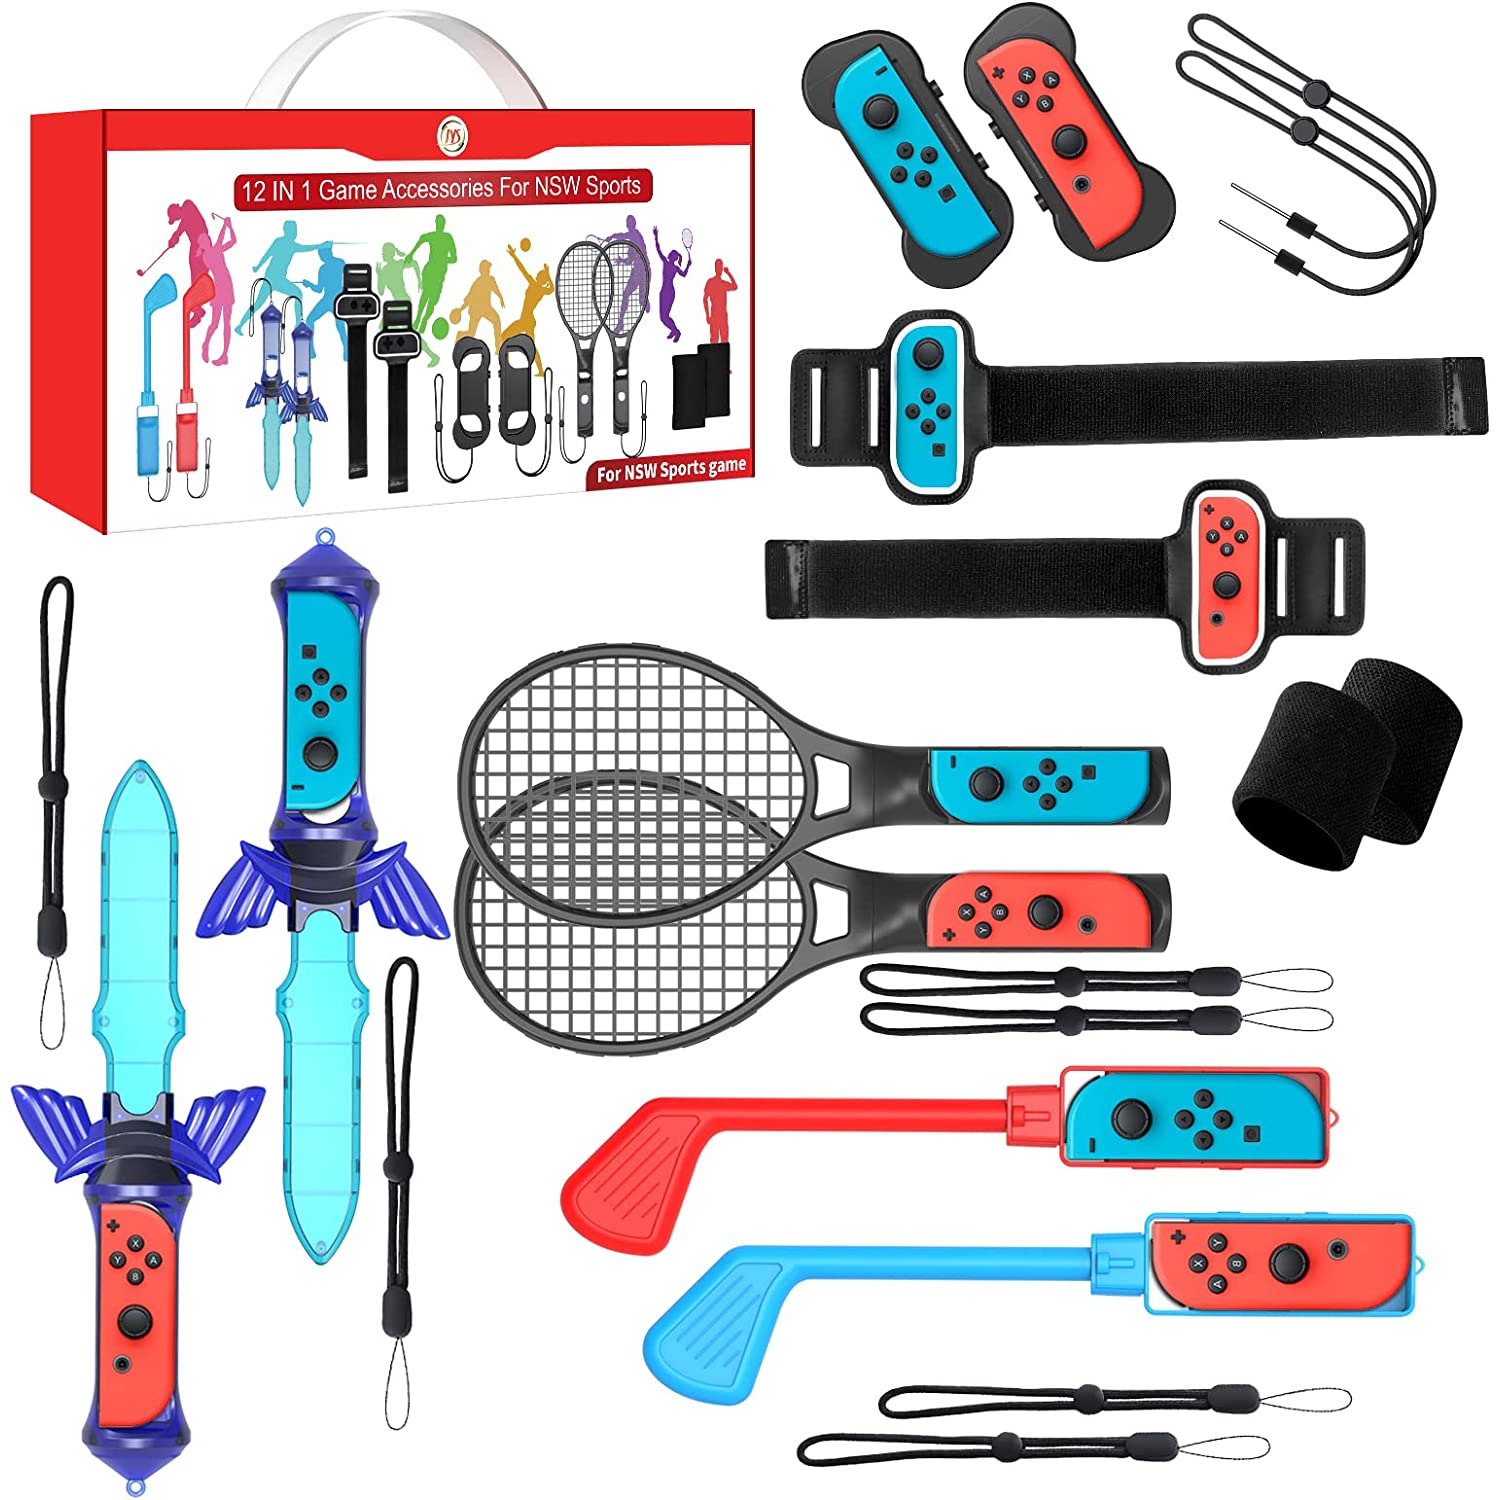 Switch Sports Accessories Bundle for Nintendo Allnice 12 in 1 Nintendo Switch Sports OLED Switch Accessories with Tennis Rac